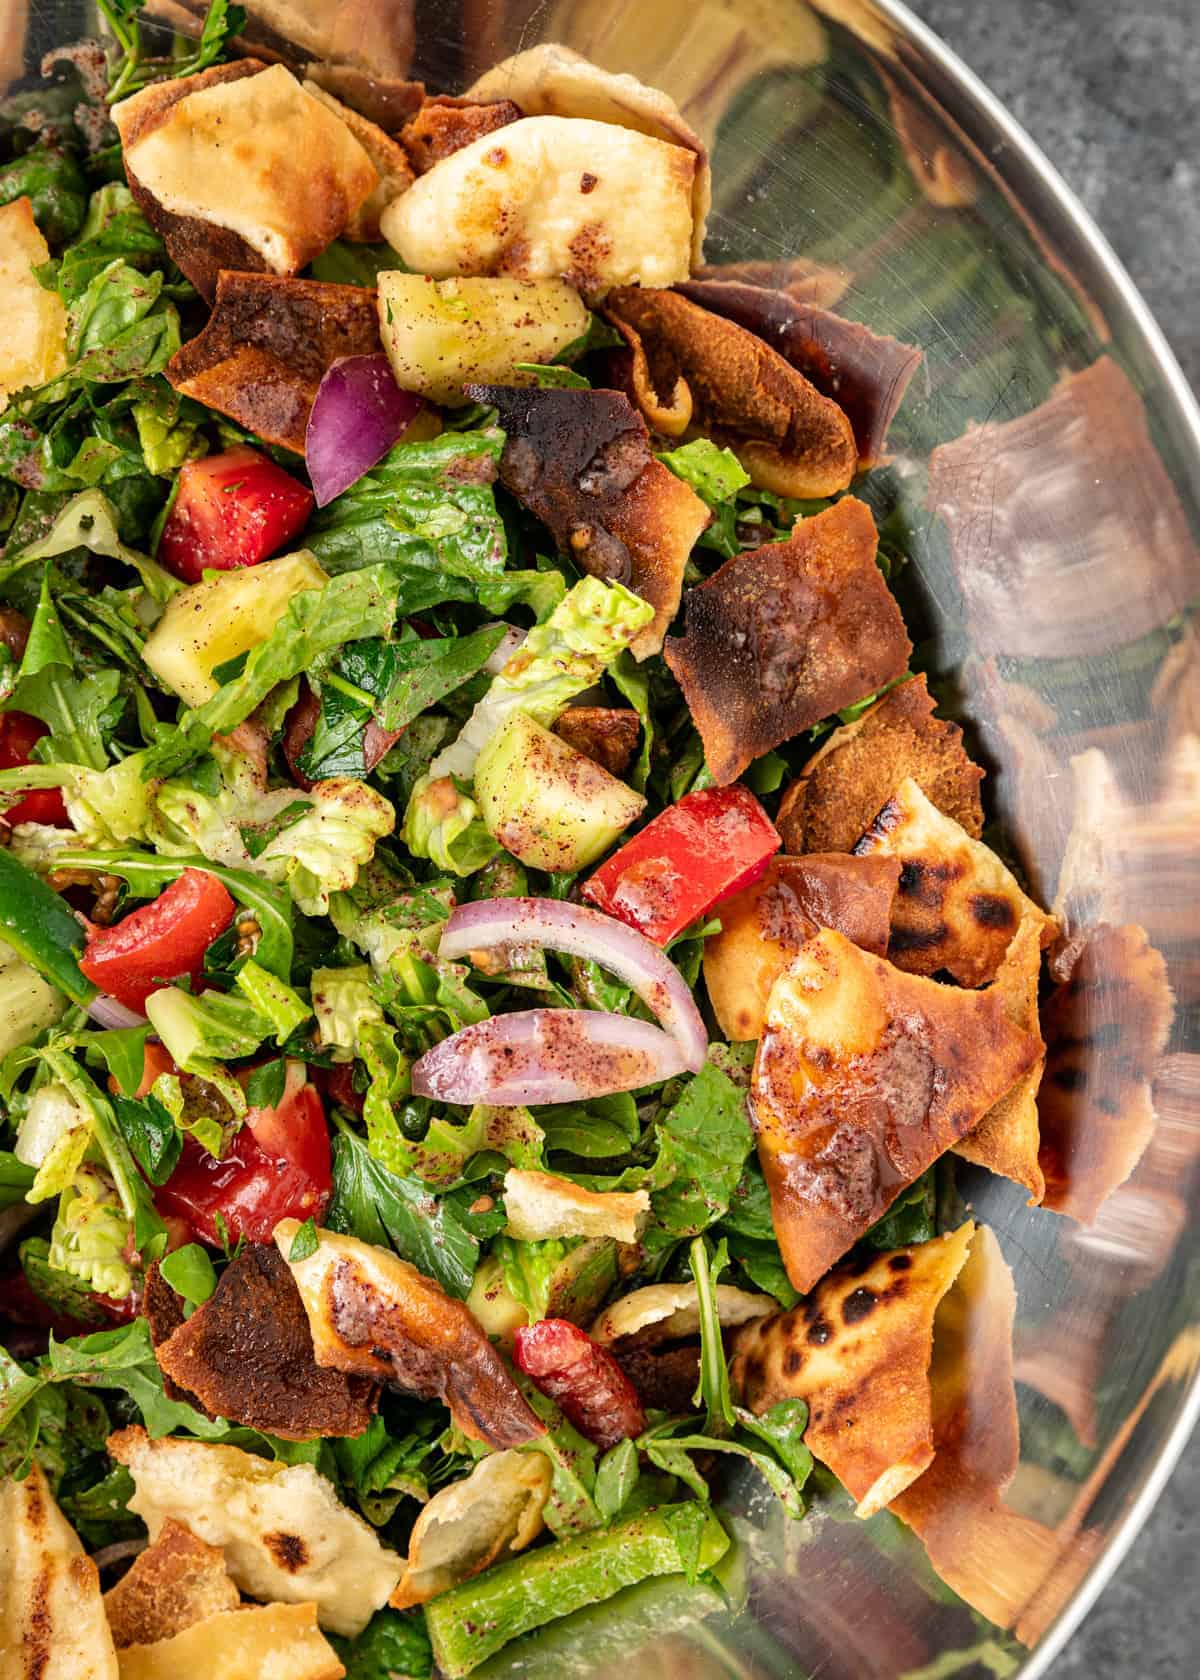 Fattoush salad in a mixing bowl.